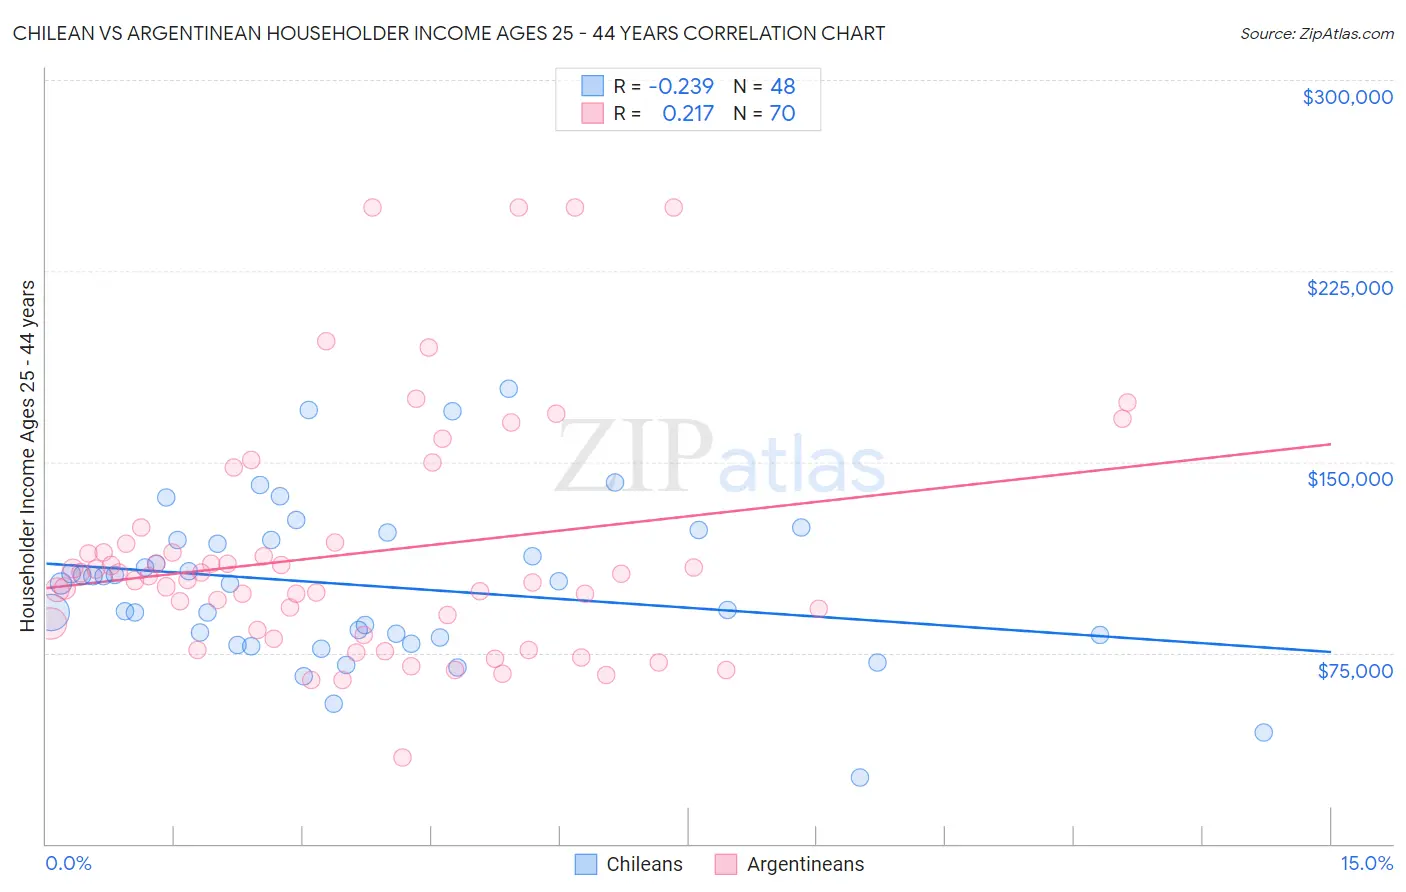 Chilean vs Argentinean Householder Income Ages 25 - 44 years